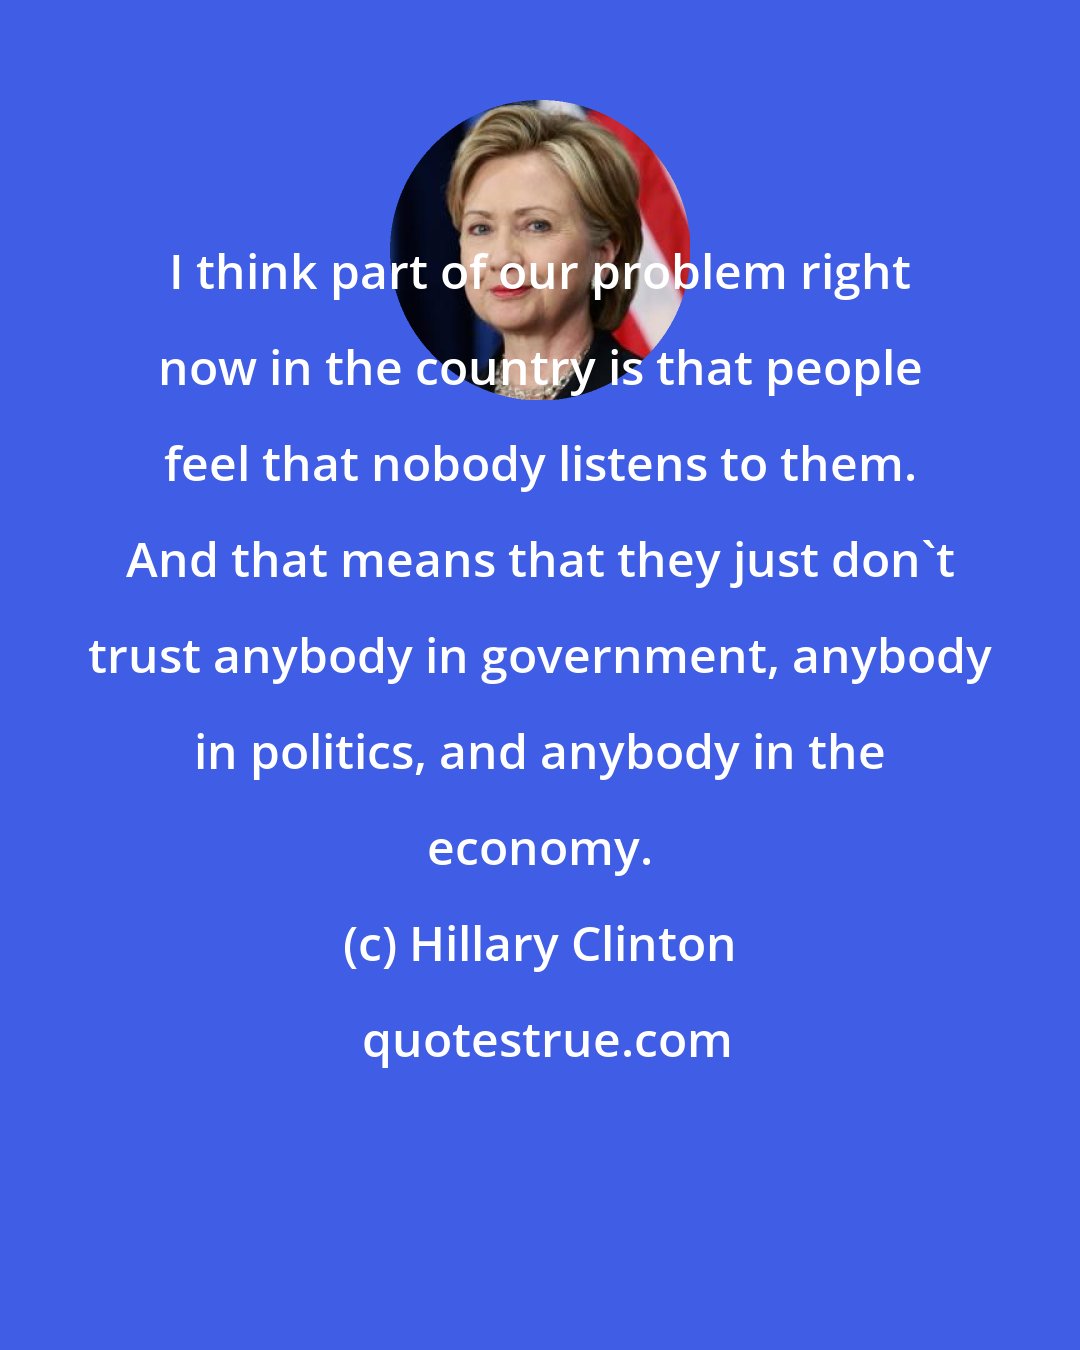 Hillary Clinton: I think part of our problem right now in the country is that people feel that nobody listens to them. And that means that they just don't trust anybody in government, anybody in politics, and anybody in the economy.